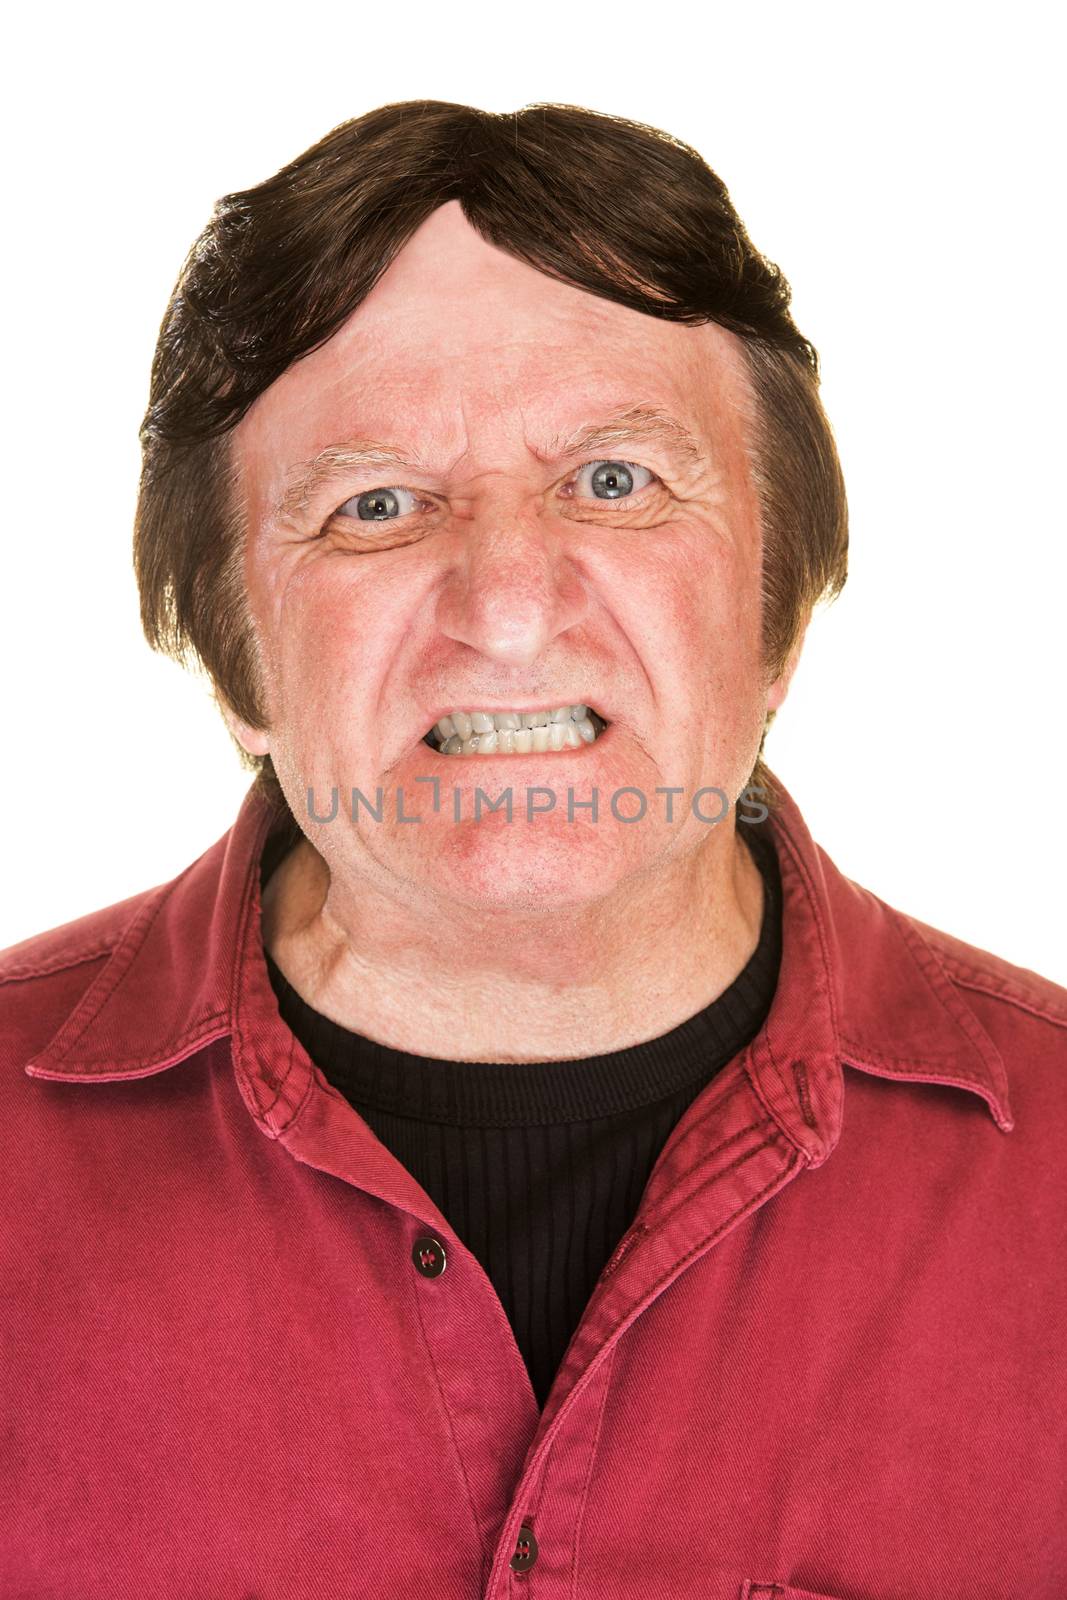 Extremely angry man in red with clenched teeth